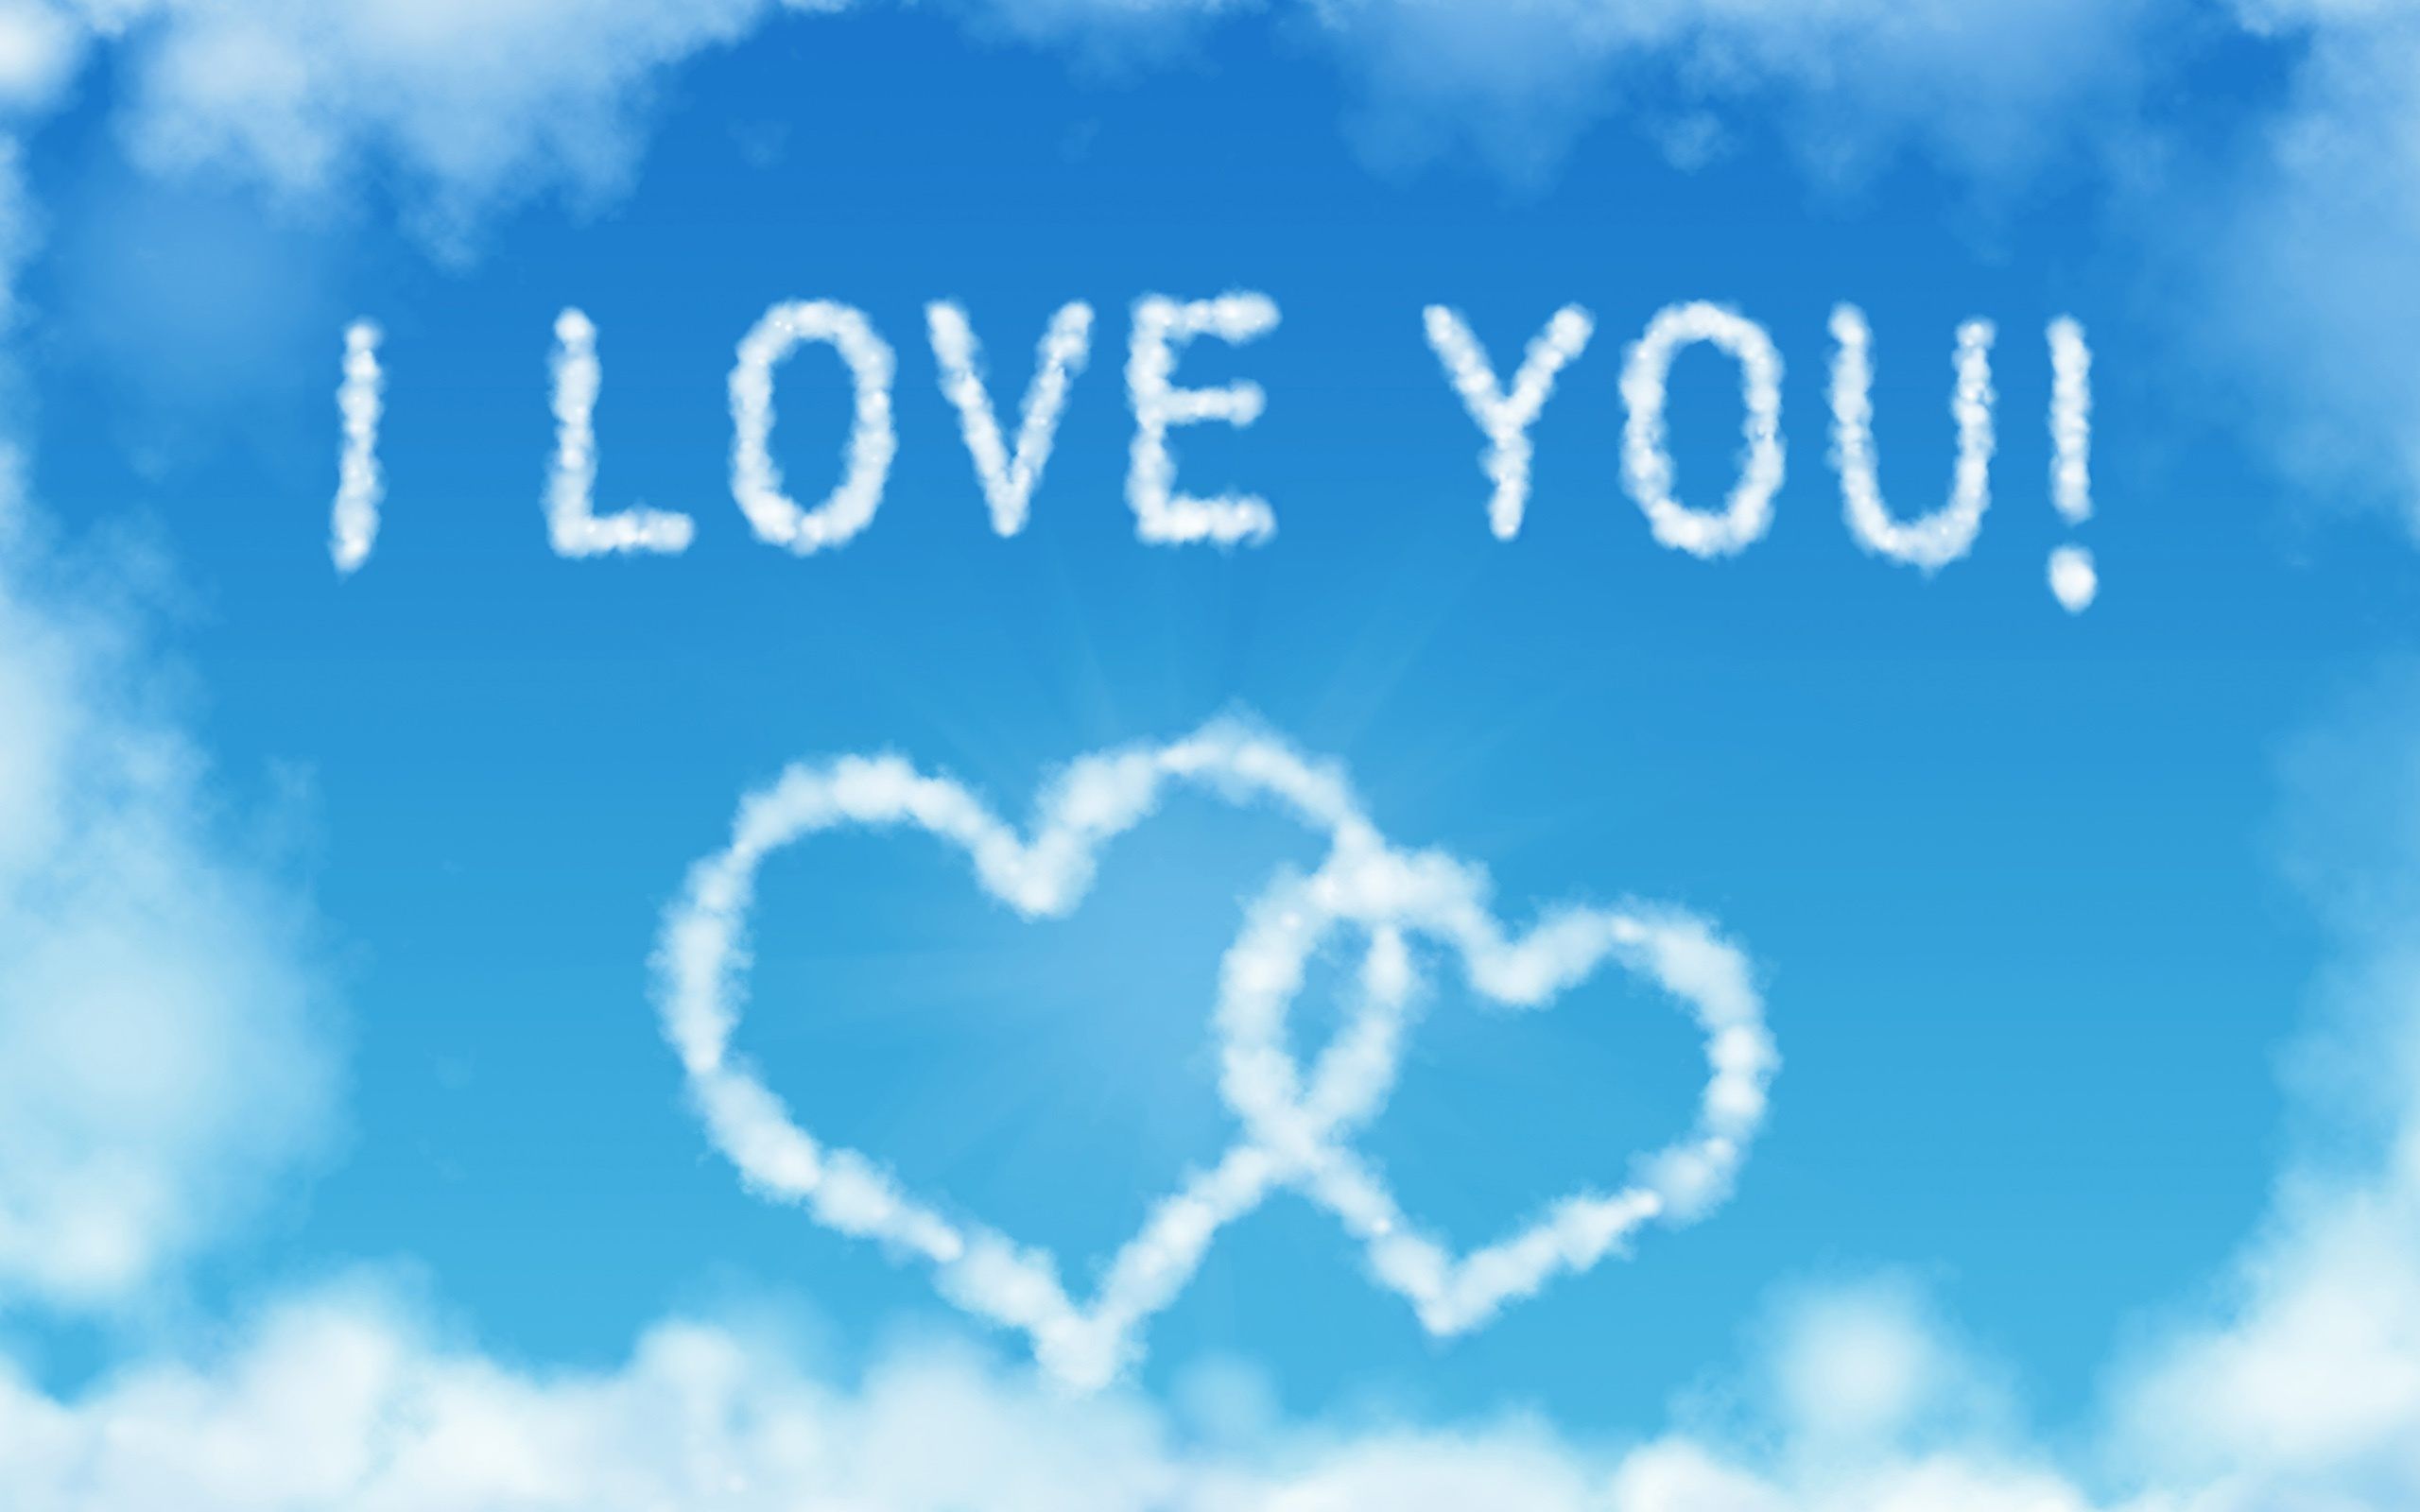 Heart Shaped Cloud Beautiful Love Hearts Wallpaper HD. Wallpaper iphone love, I love you picture, I love you image